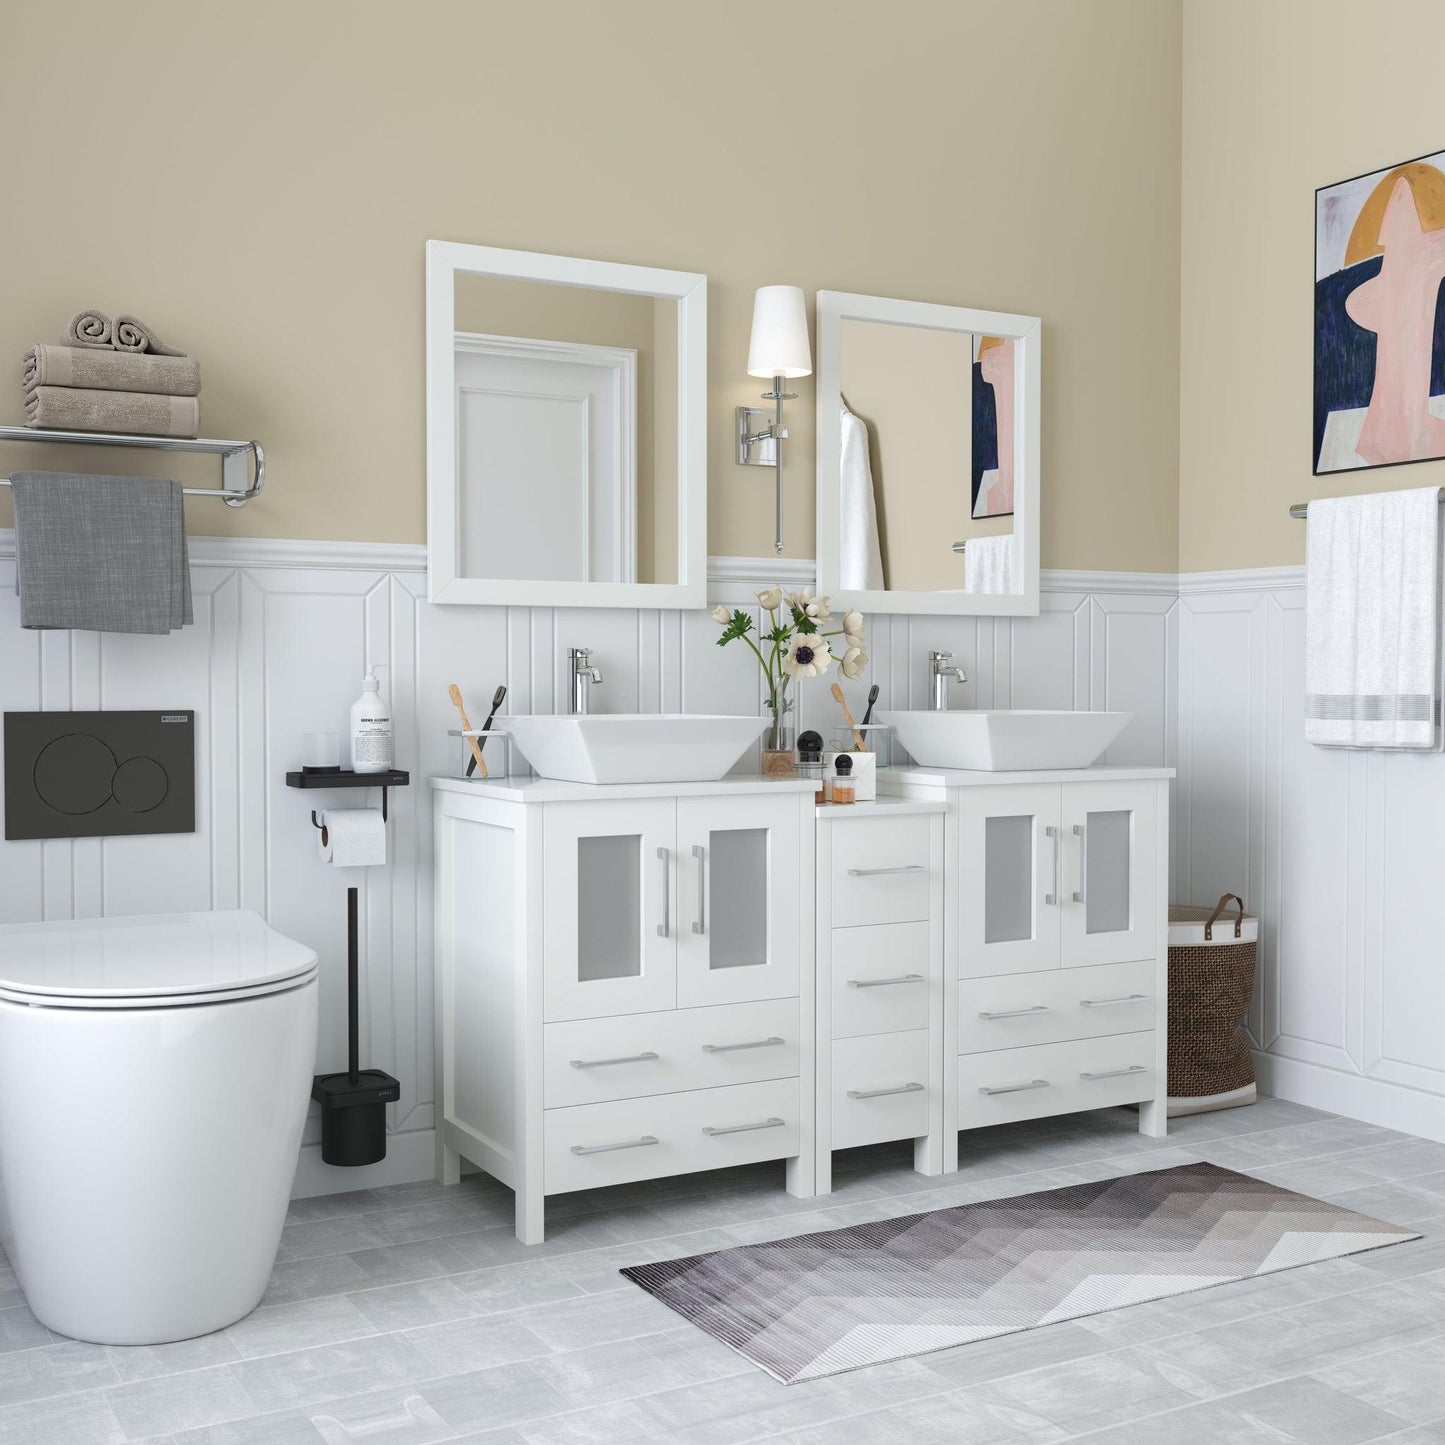 Vanity Art Ravenna 60" Double White Freestanding Vanity Set With White Engineered Marble Top, 2 Ceramic Vessel Sinks, 1 Side Cabinet and 2 Mirrors